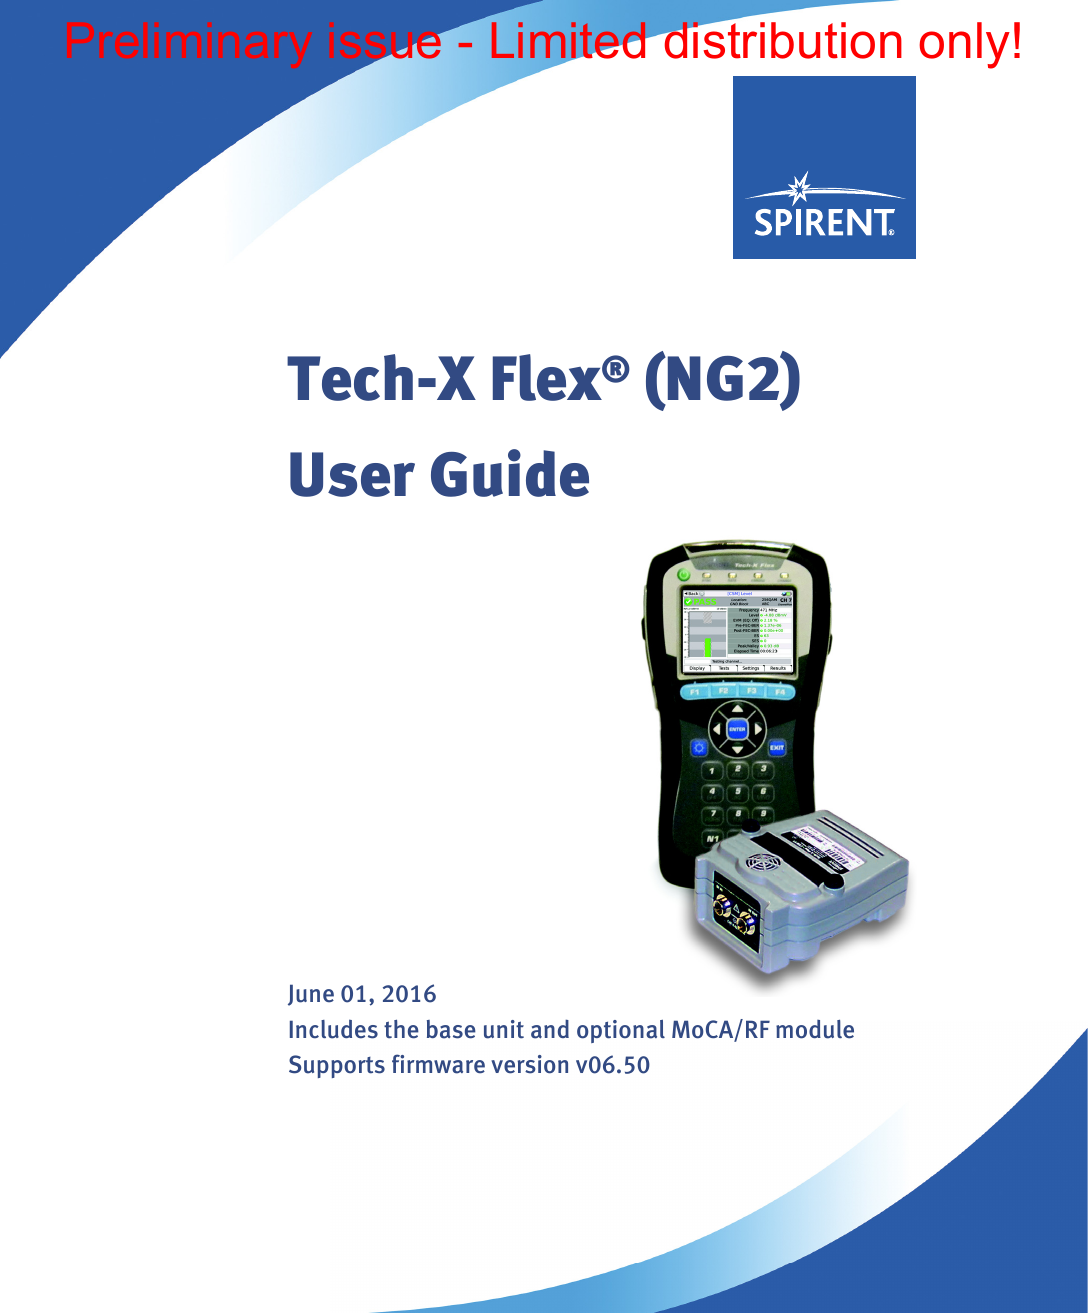 Tech-X Flex® (NG2)User GuideJune 01, 2016Includes the base unit and optional MoCA/RF moduleSupports firmware version v06.50Preliminary issue - Limited distribution only!